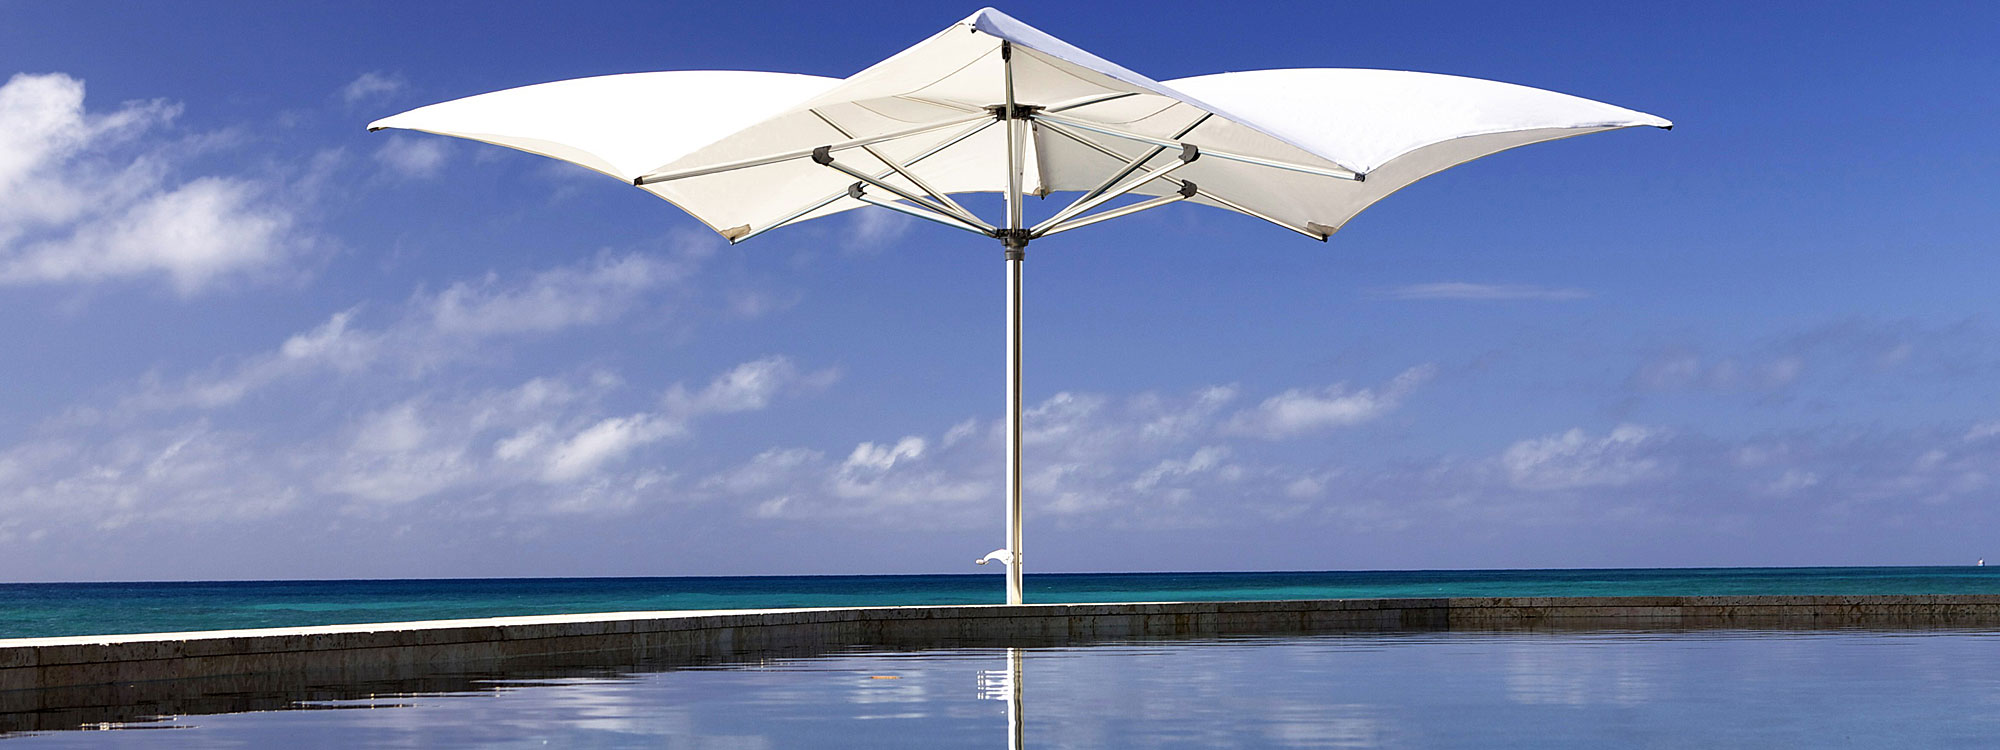 Manta Parasol From TUUCI Ocean Master Max Centre MAST PARASOLS. MODERN Outdoor Parasol, LUXURY QUALITY Parasols FOR HIGH WINDS & Optional Parasol With HEATER & LIGHTING.